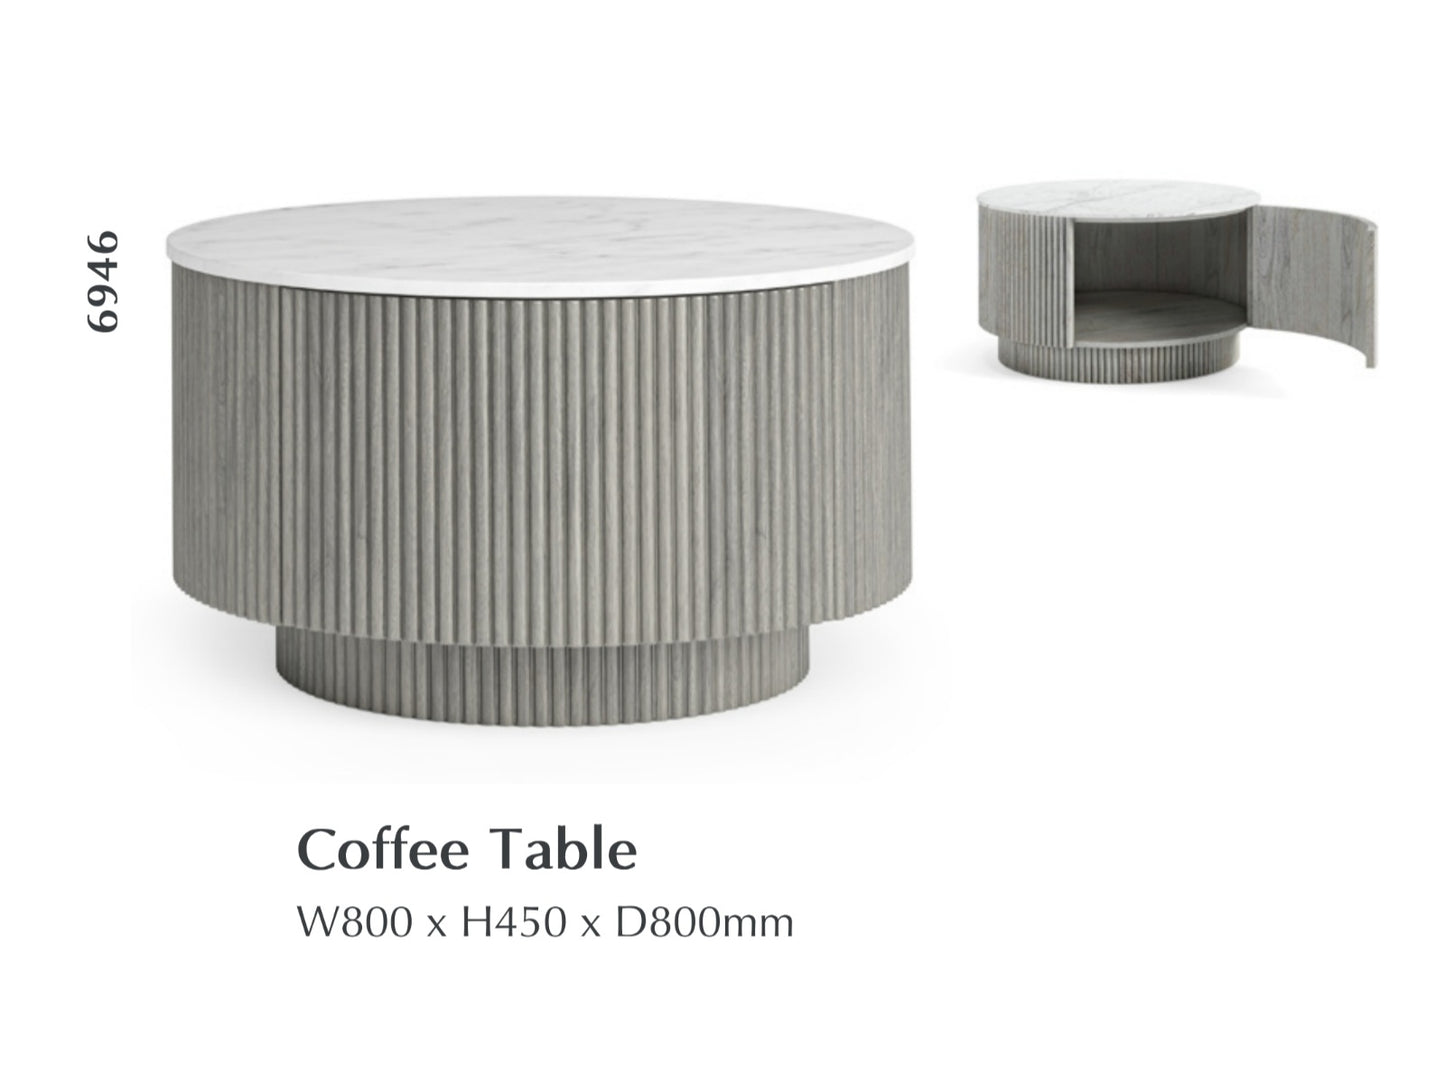 Isabella Coffee Table